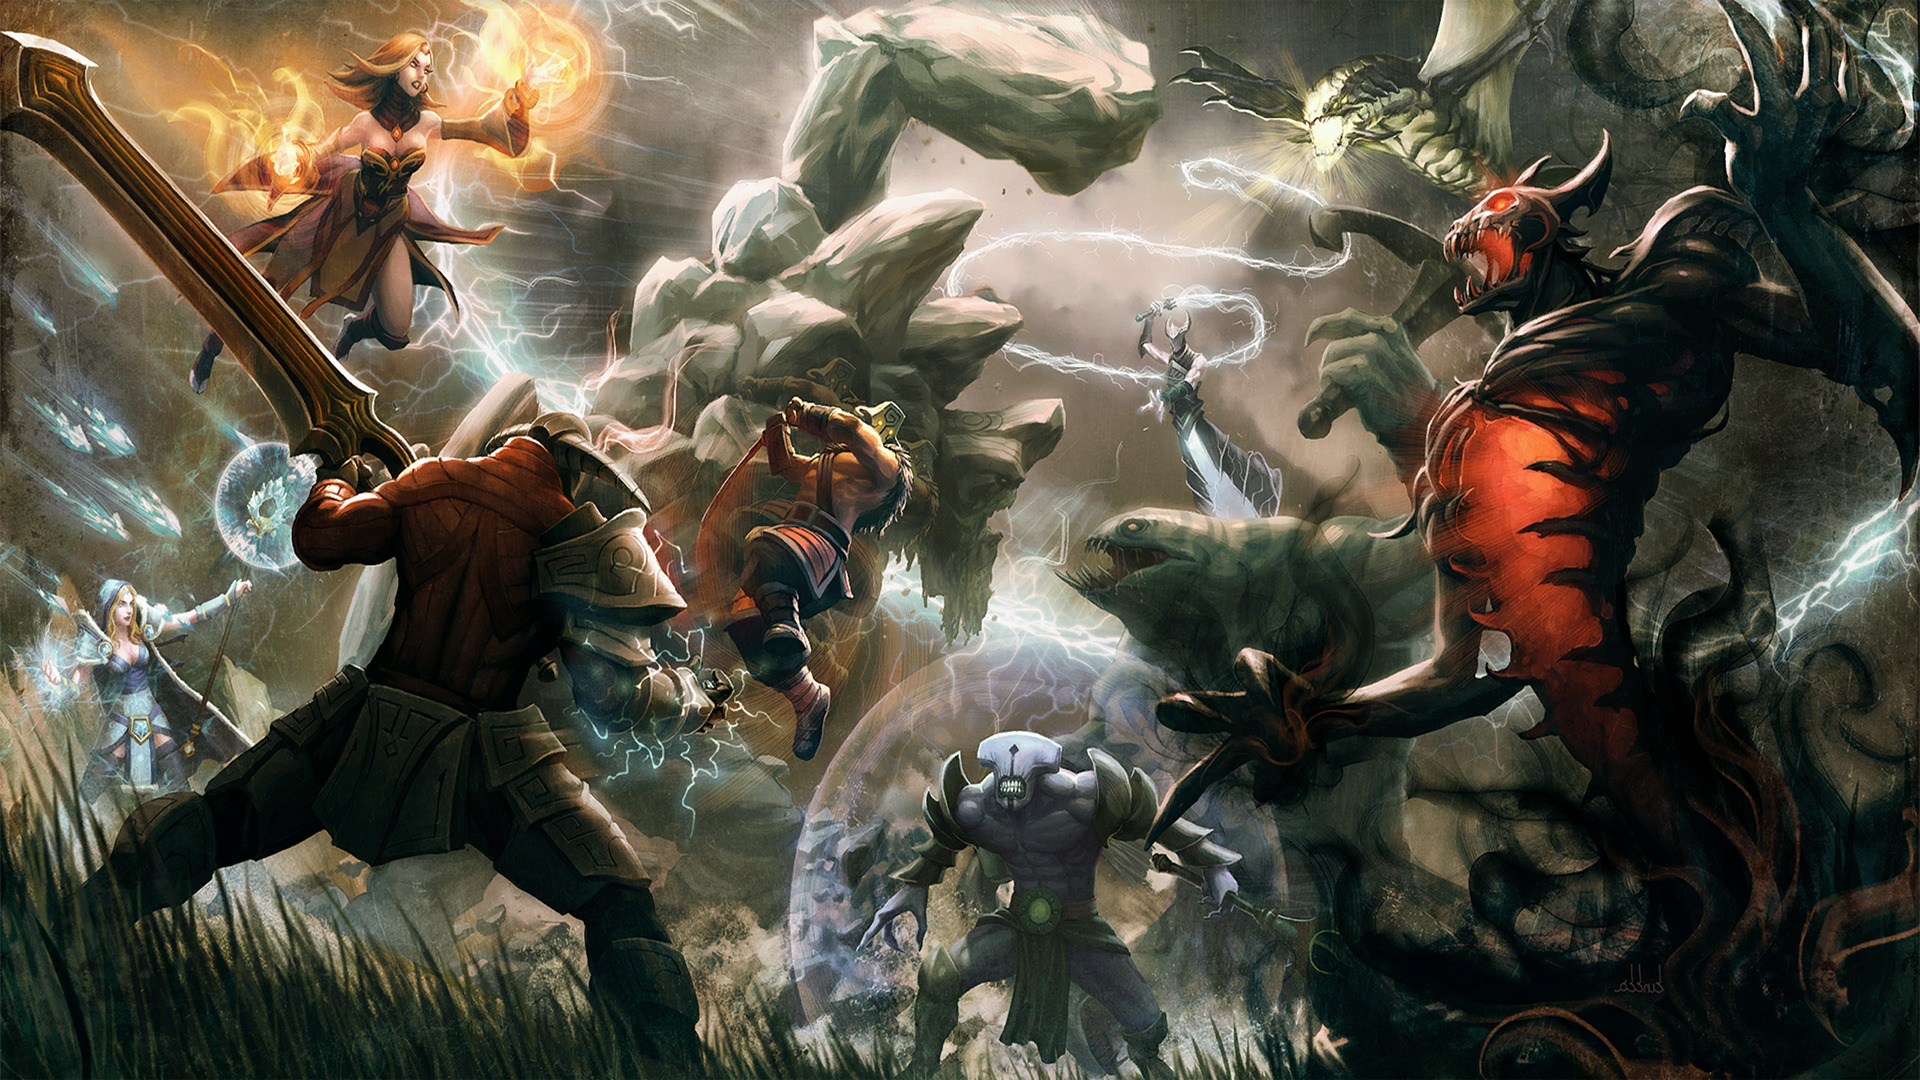 dota 2 loading screen wallpaper,action adventure game,strategy video game,pc game,cg artwork,adventure game